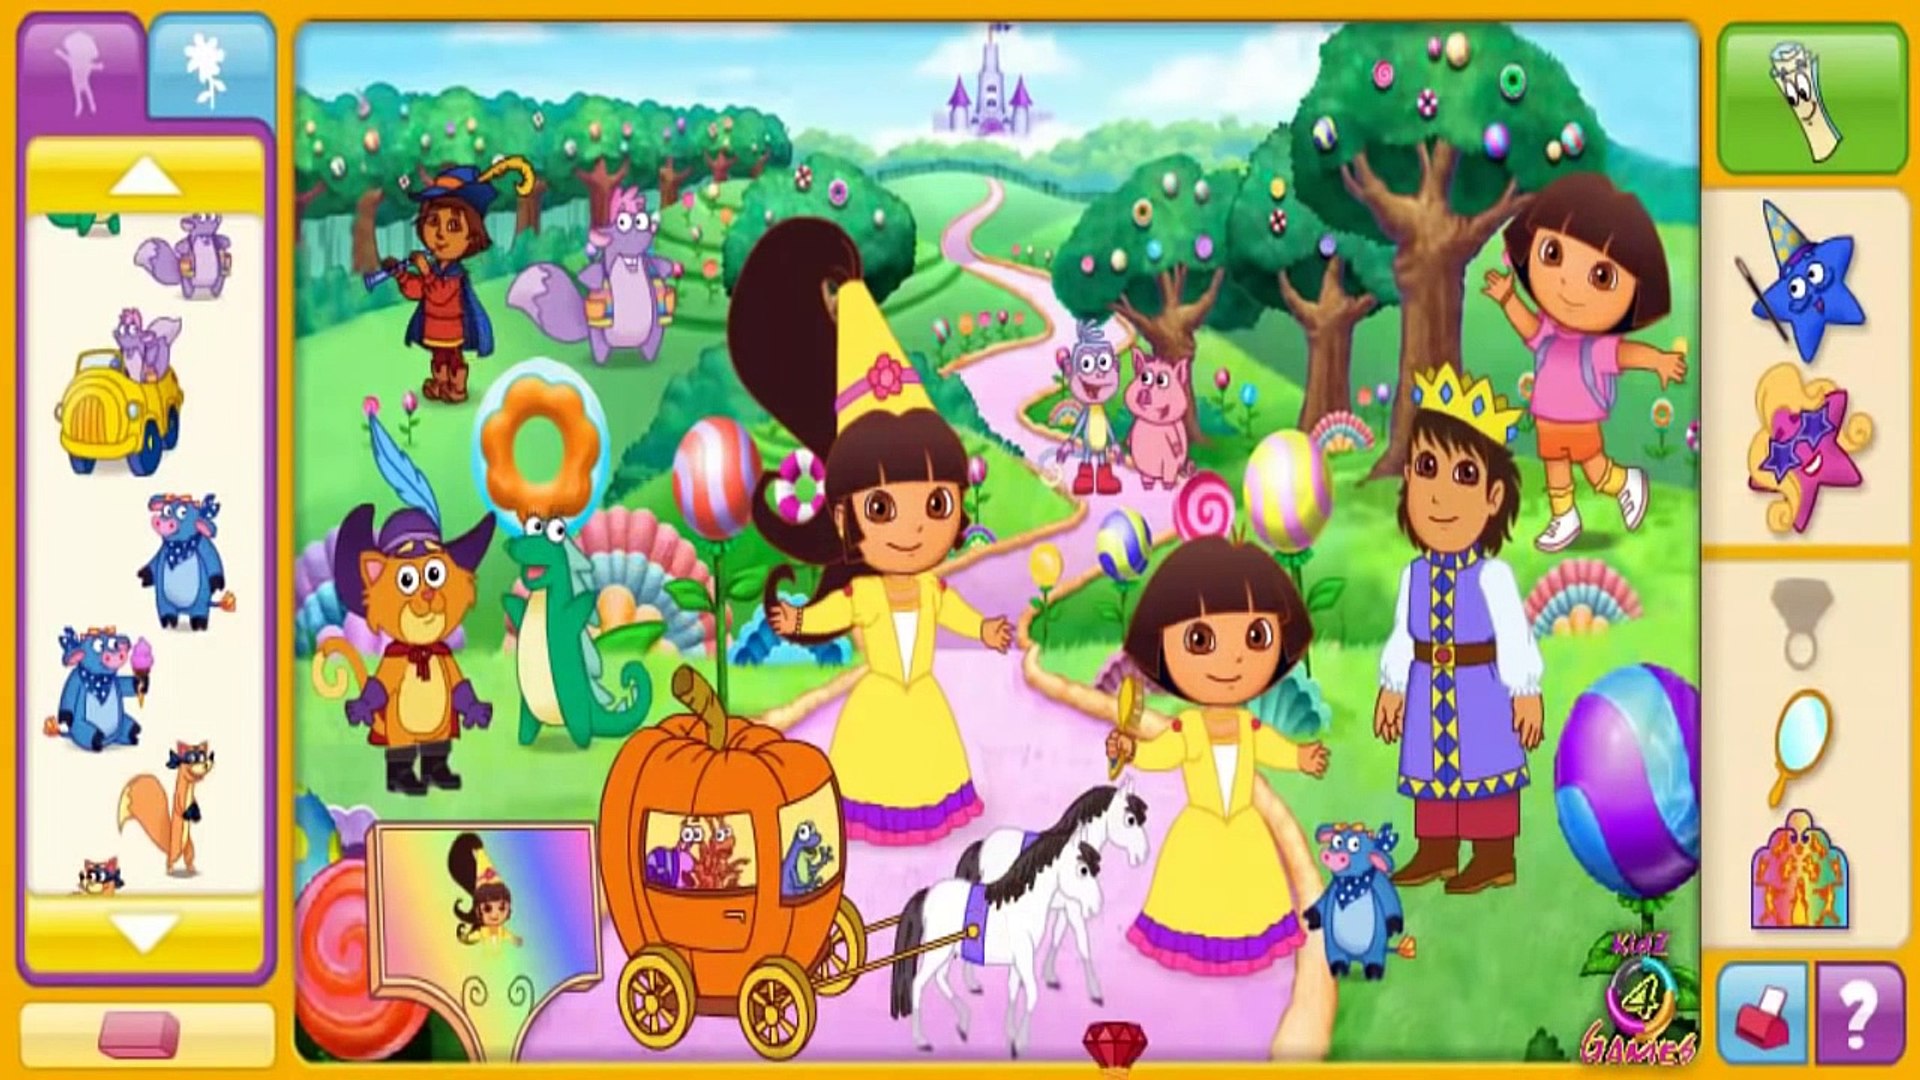 Watch Play New Dora Games 14 Adventures On Youtube Online Over 73 Minutes Adventures Games Video Dailymotion